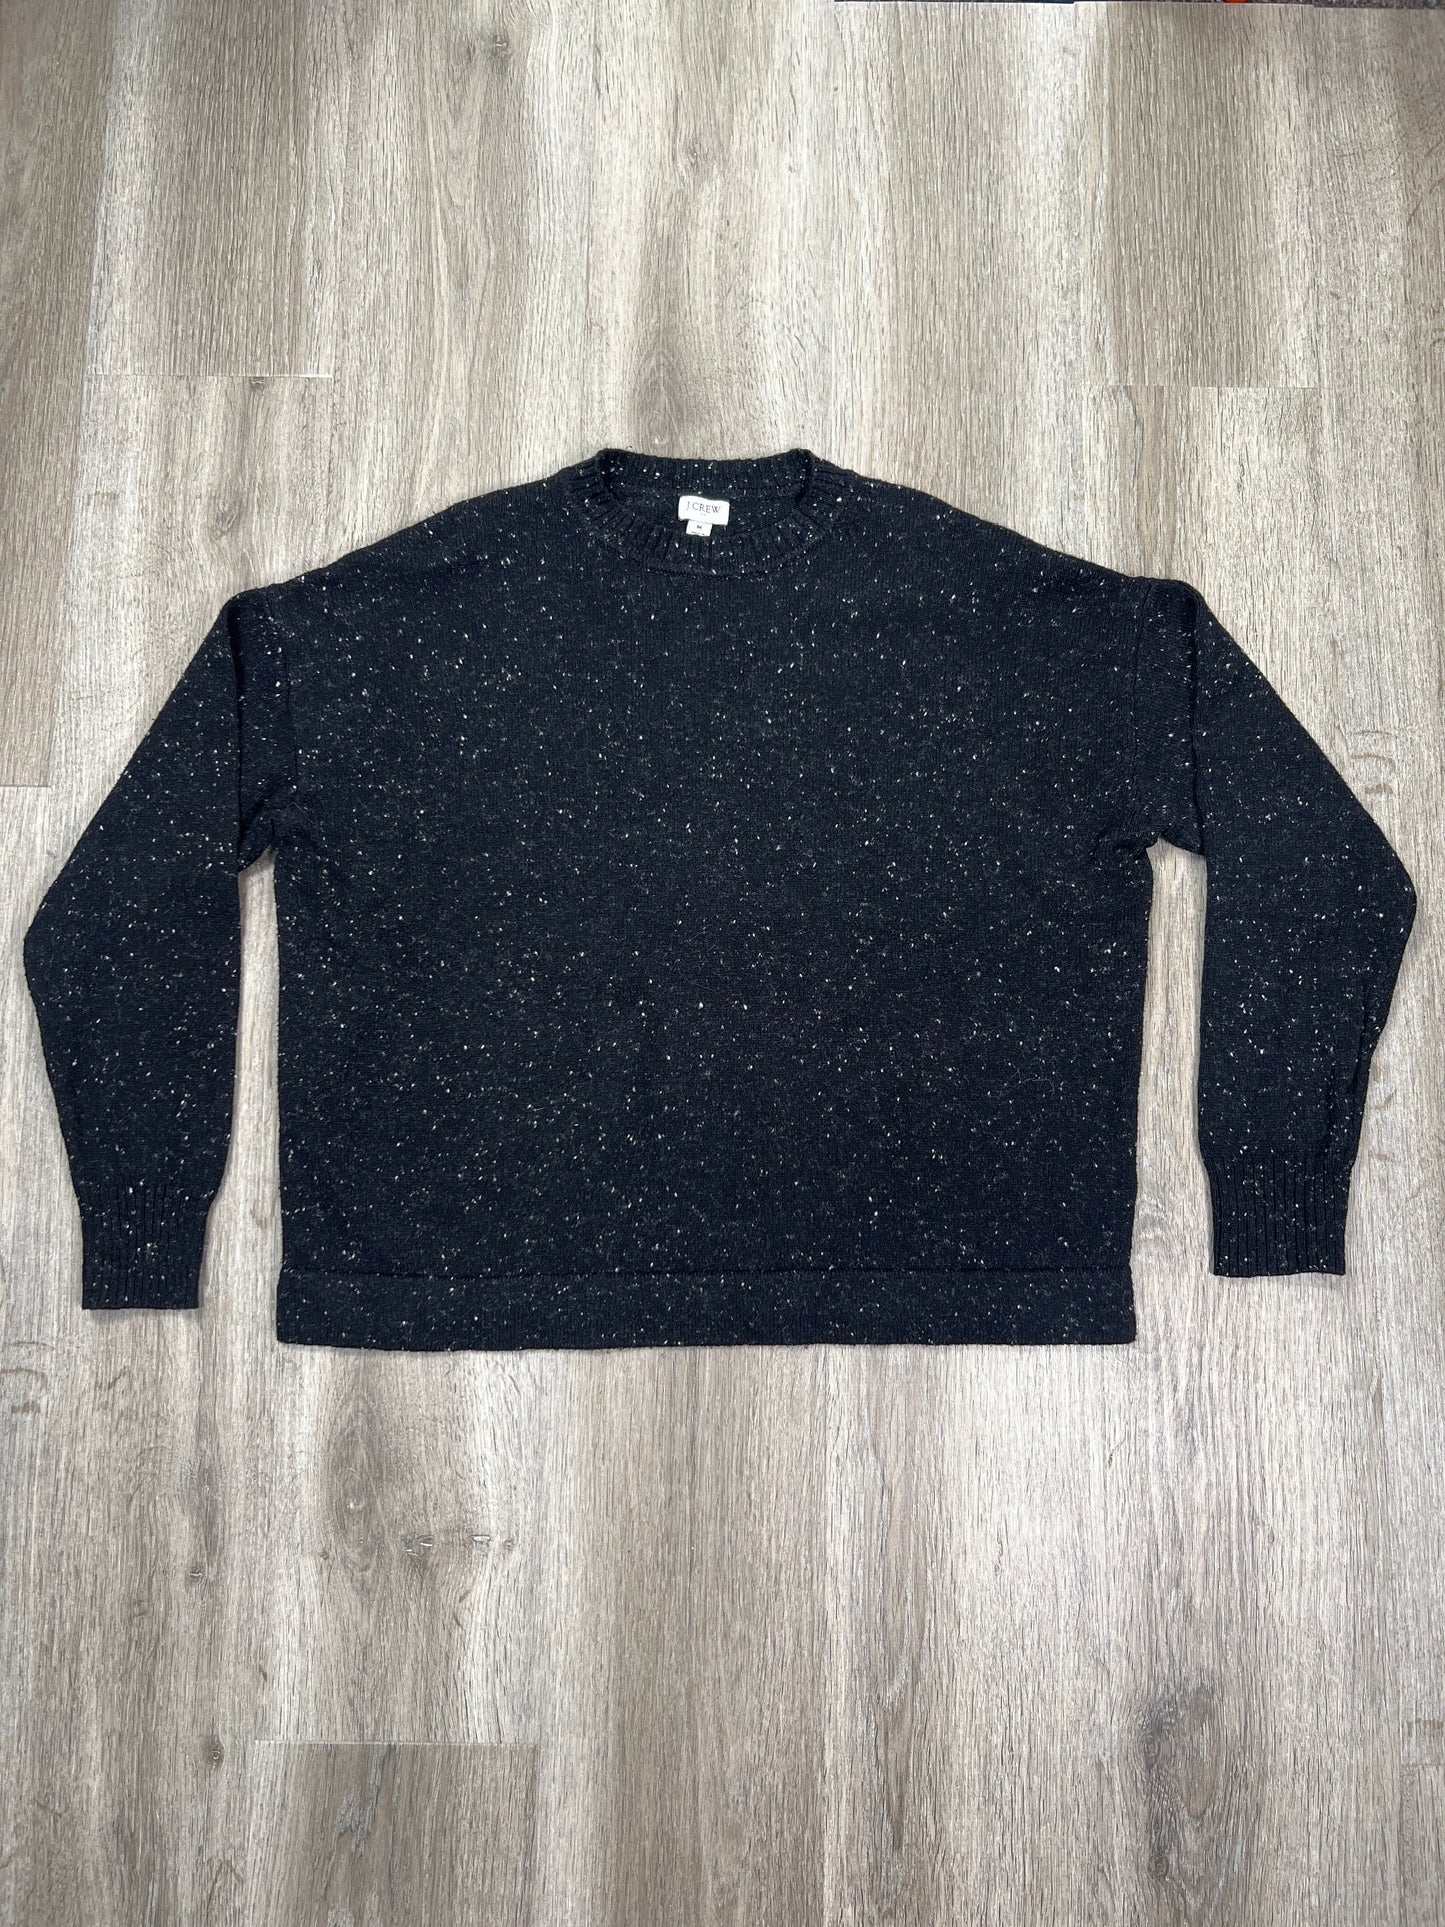 Sweater By J. Crew  Size: M